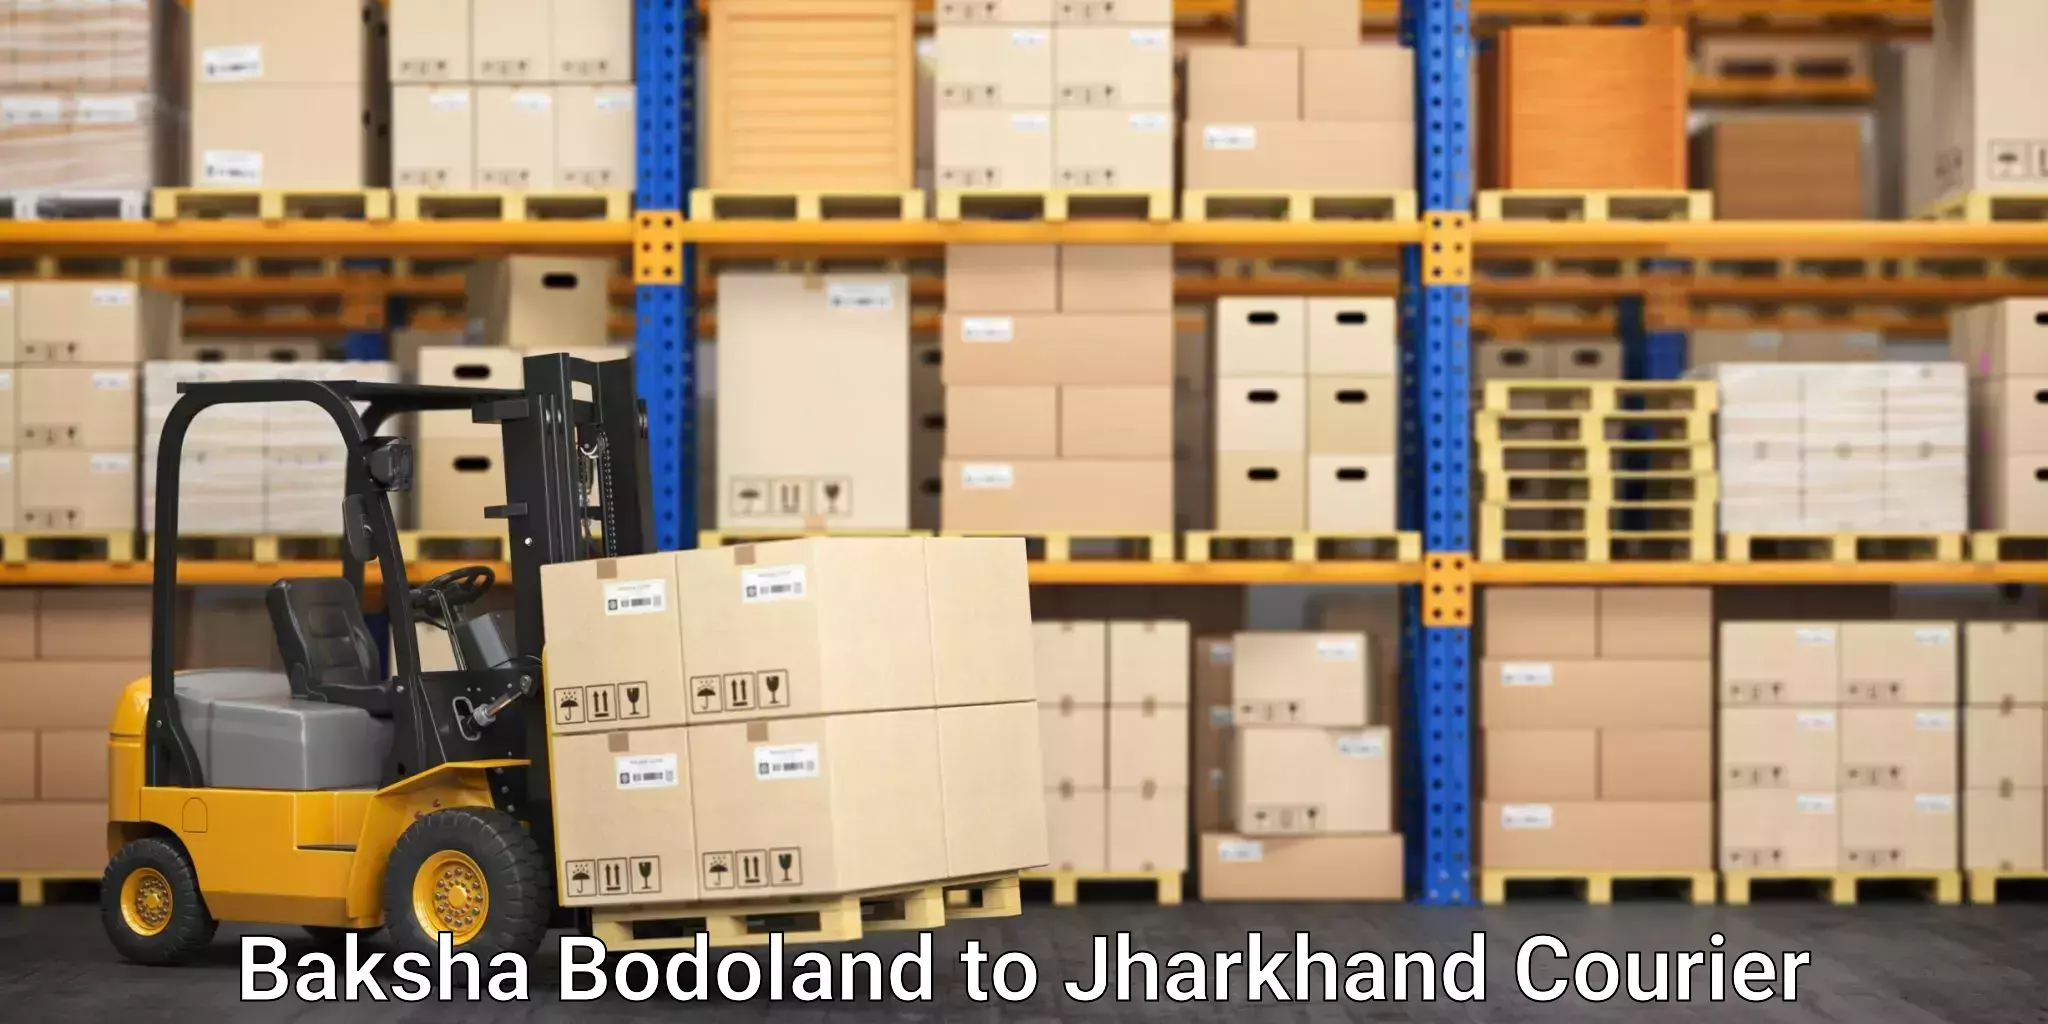 Reliable shipping solutions in Baksha Bodoland to Domchanch